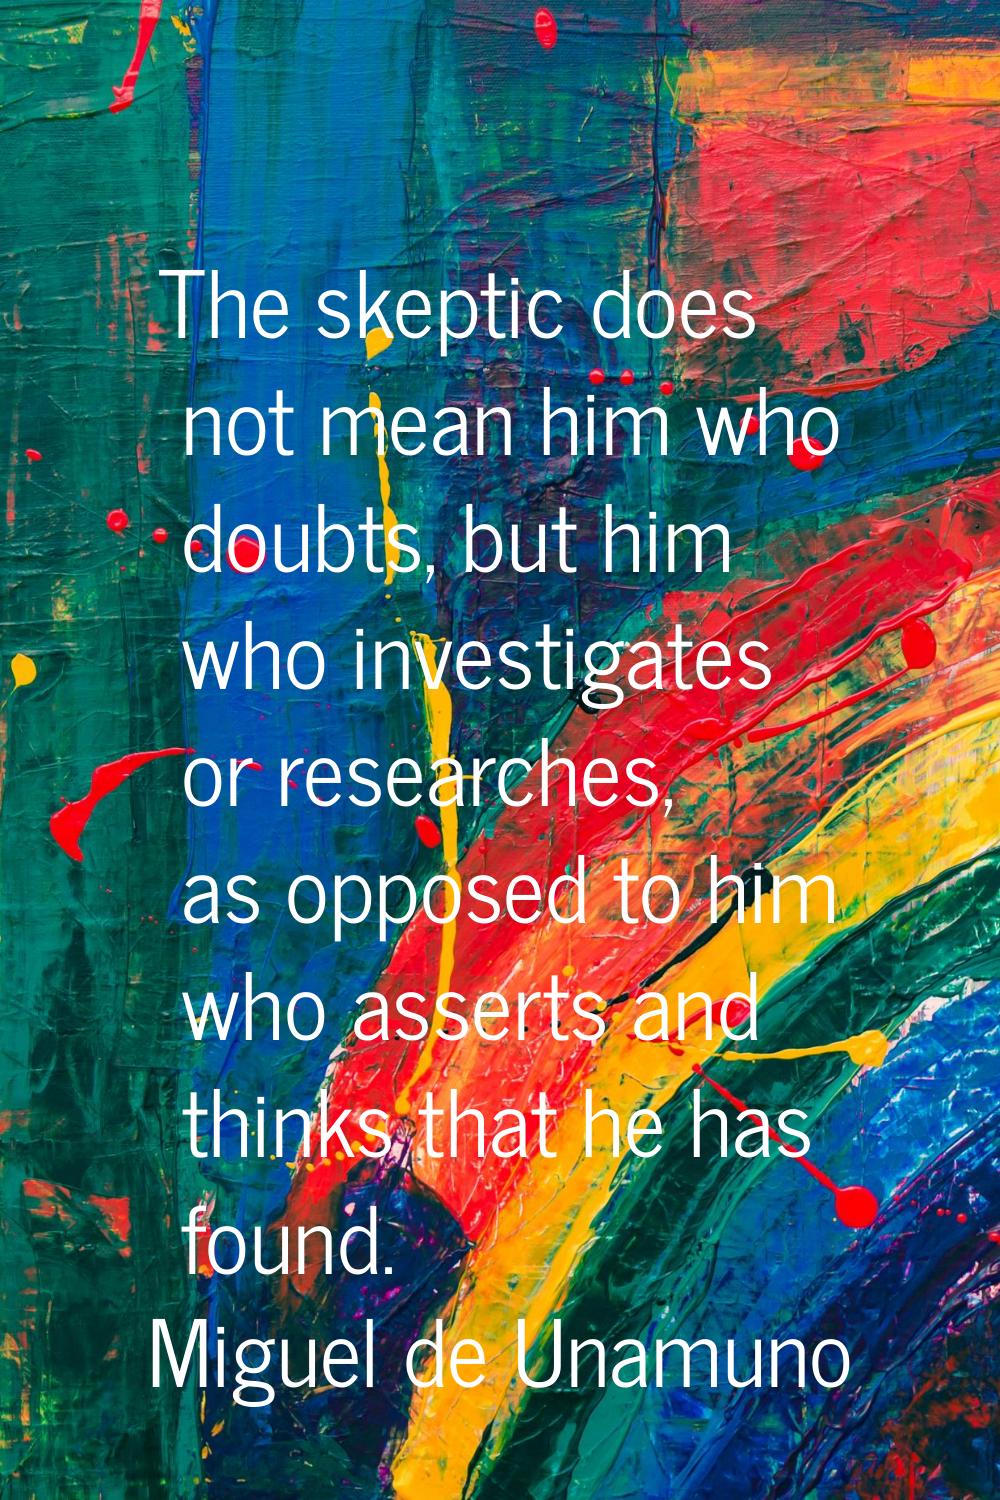 The skeptic does not mean him who doubts, but him who investigates or researches, as opposed to him